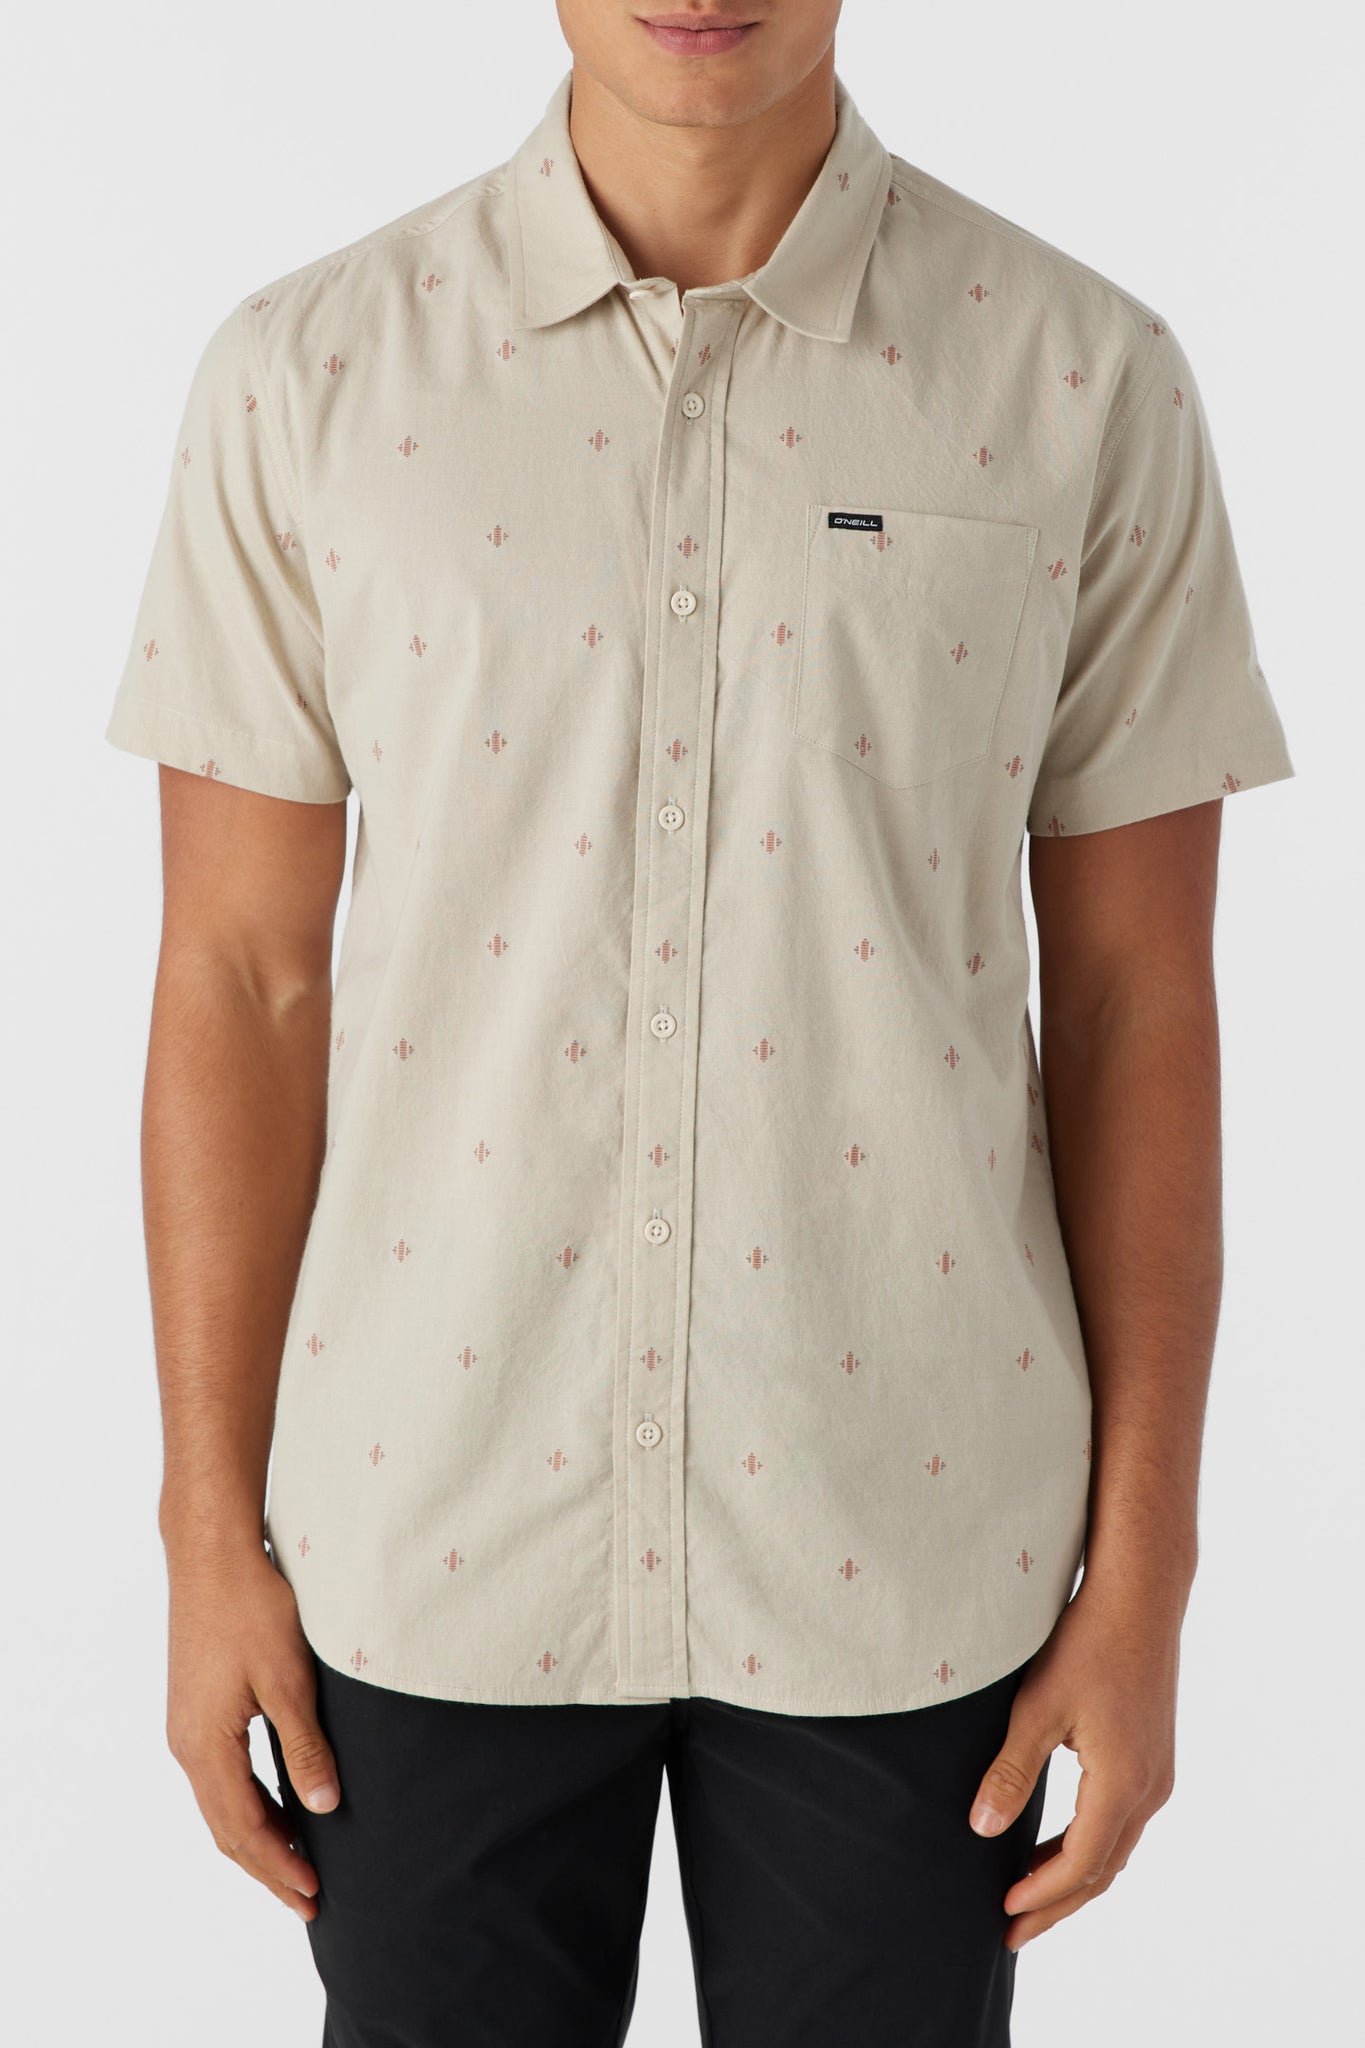 QUIVER STRETCH DOBBY STANDARD FIT SHIRT